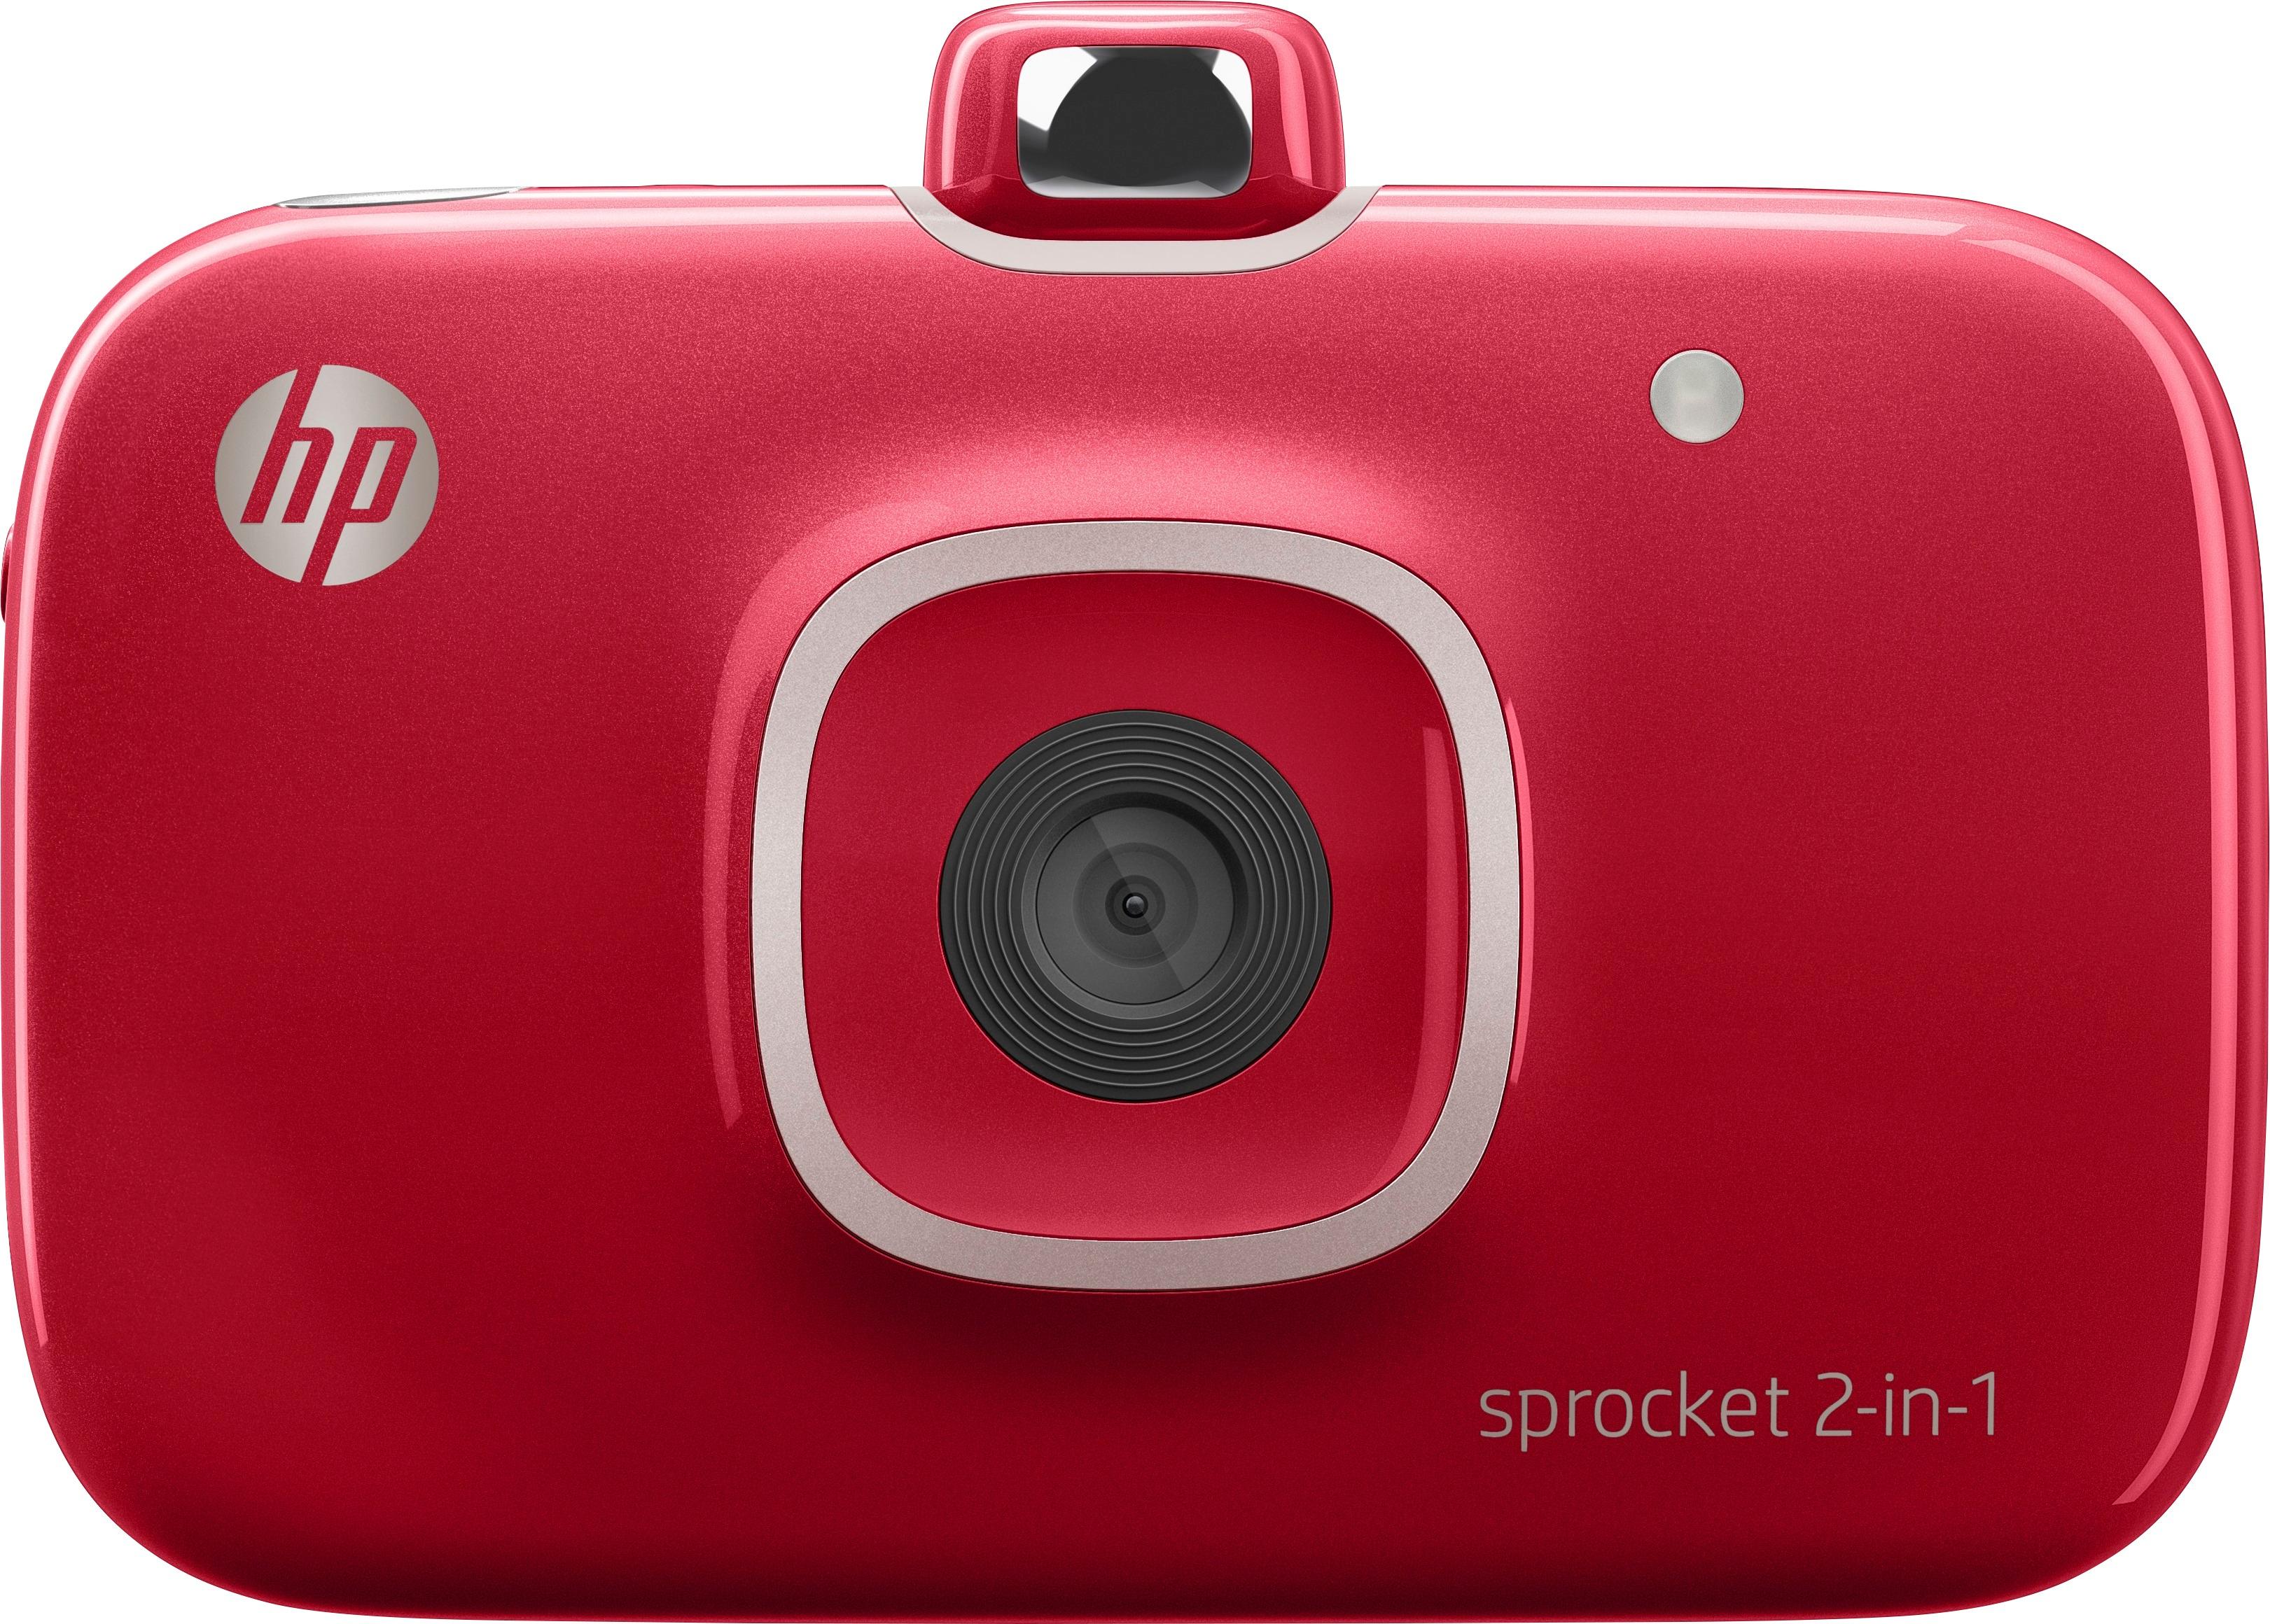 Top 10 Ways to Use the HP Sprocket to Capture Every Fun Moment